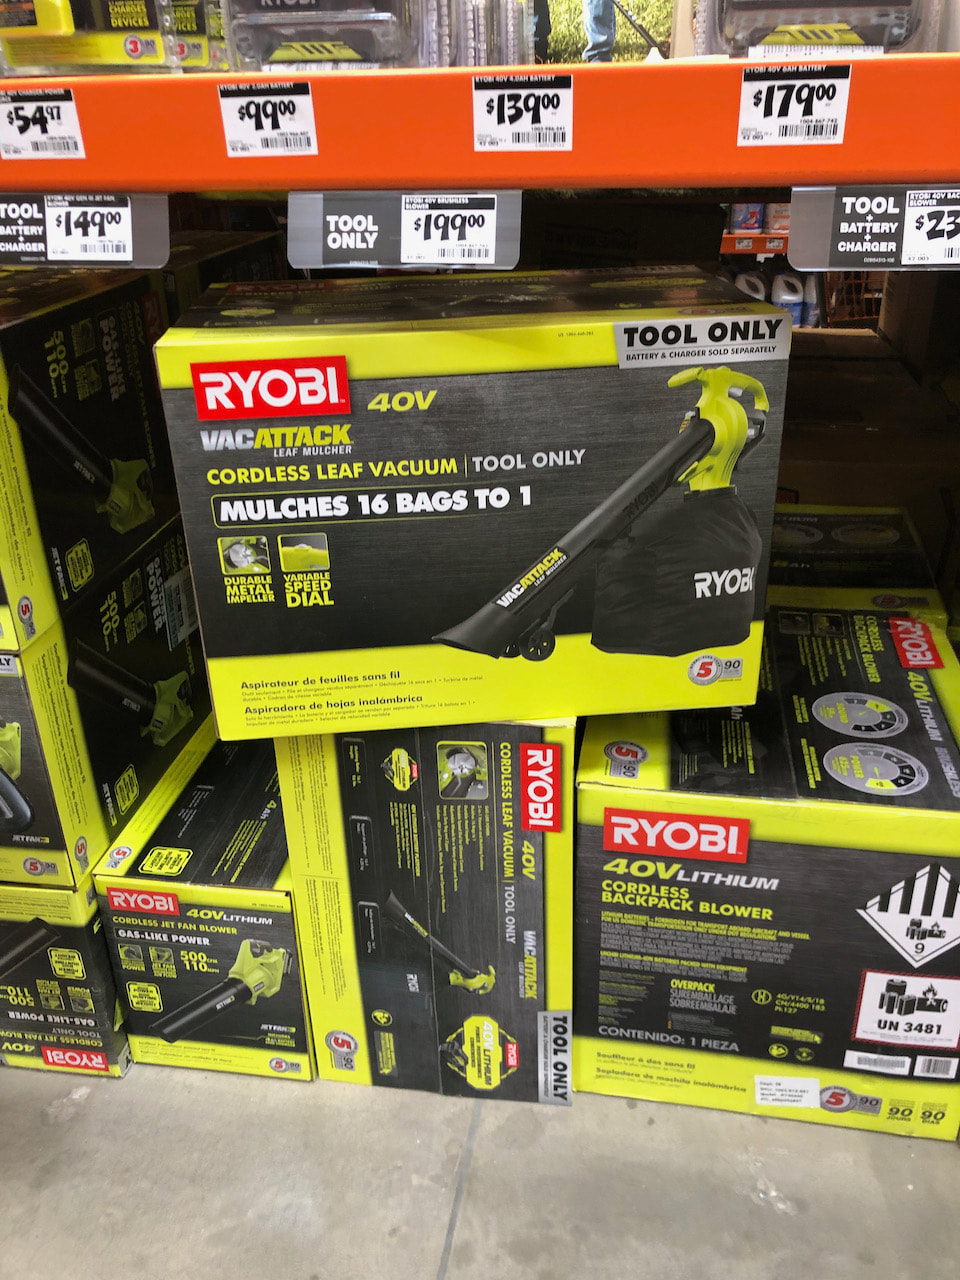 The Ryobi cordless leaf vacuum on the shelf at the Home Depot.